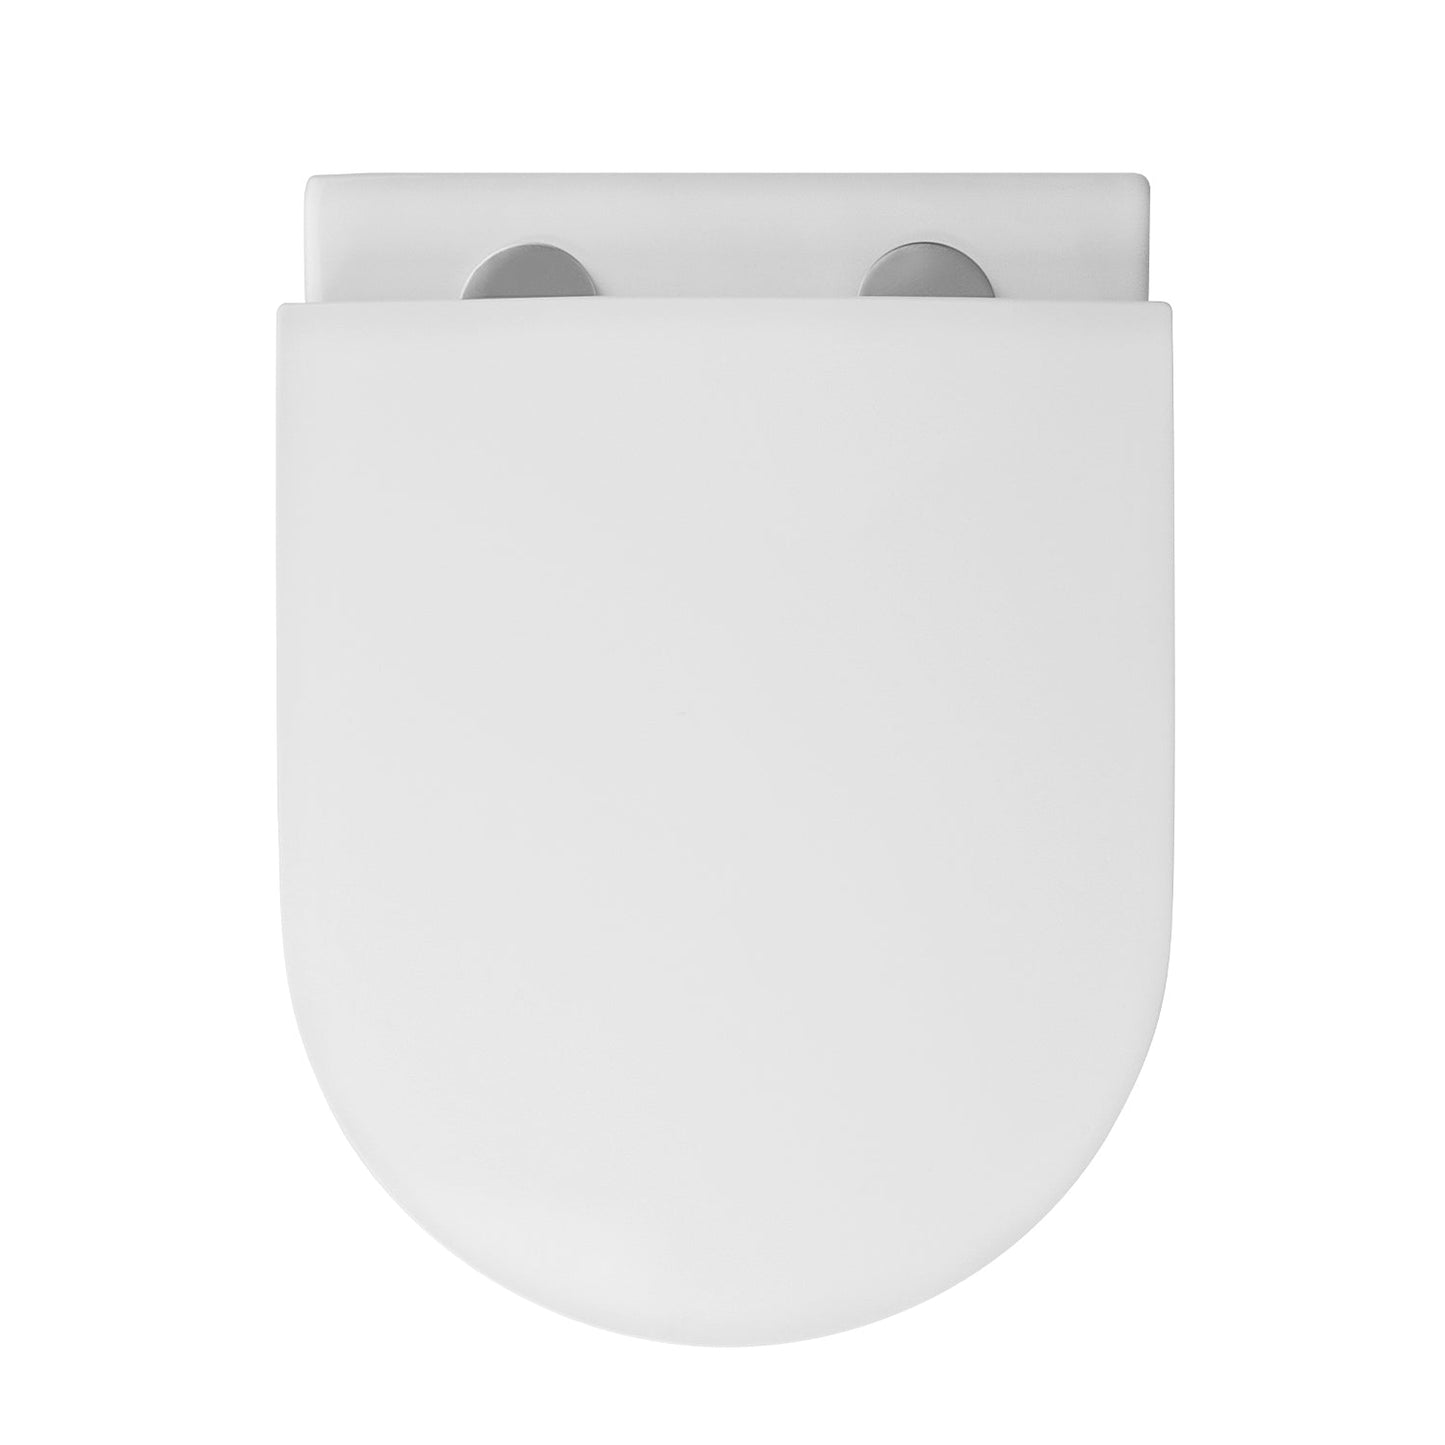 DeerValley Liberty 1.1/1.6GPF Siphon Flushing Elongated White Wall-Mounted Toilet With Concealed In-Wall Toilet Tank